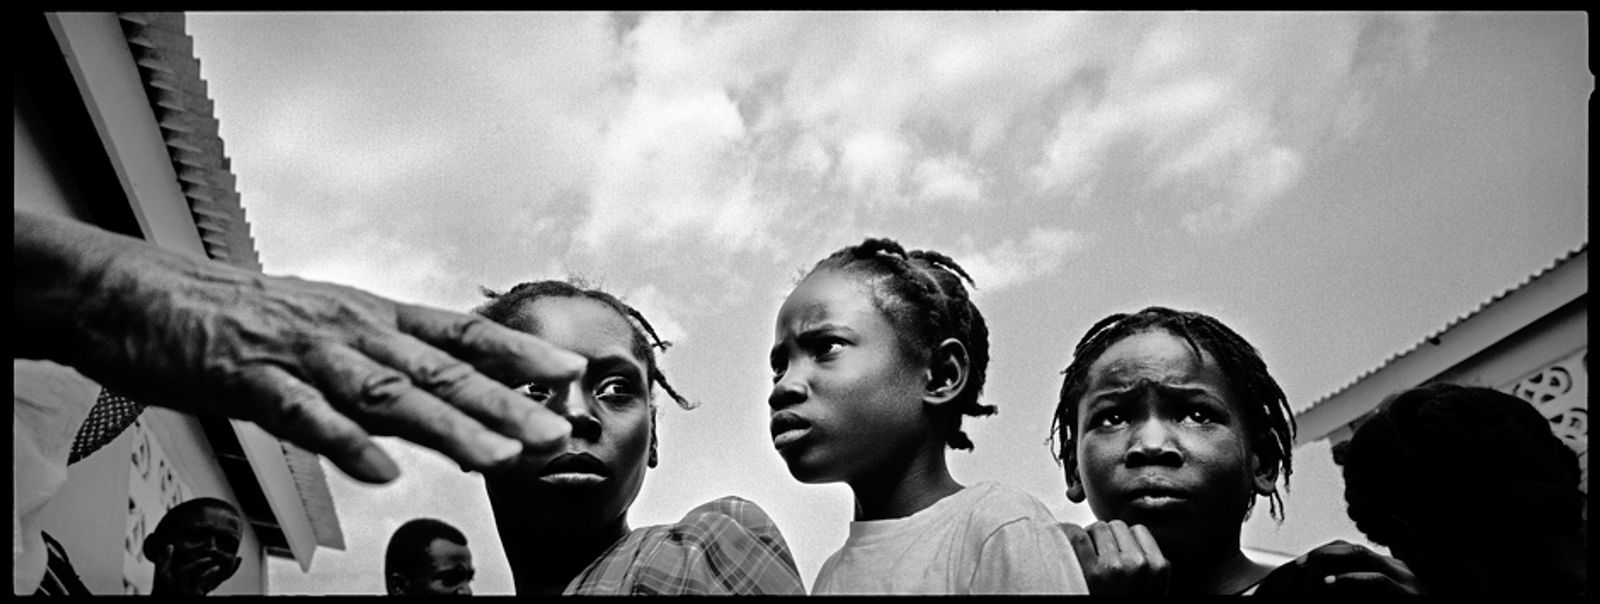 © Benjamin Rusnak - A trio of girls anxiously waits in line for food at a relief agency distribution near Port-au-Prince, Haiti.